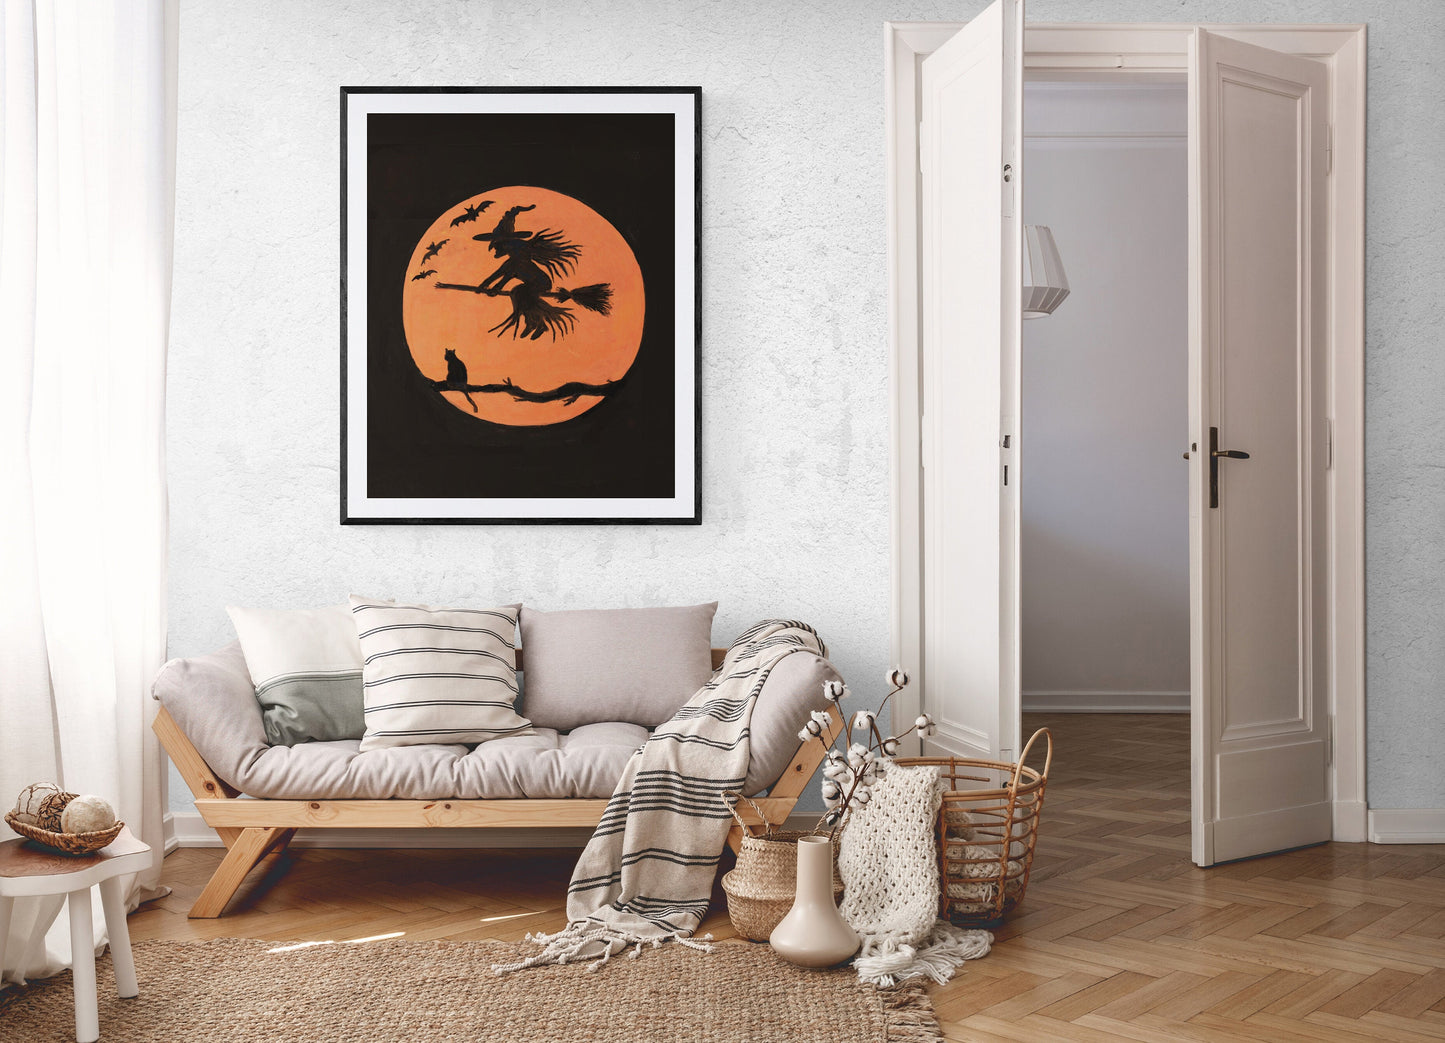 Witch Flying with a Broom Print, Halloween Cat Painting, Halloween Orange Moon Portrait, Holiday Wall Art, Flying with Bats Poster